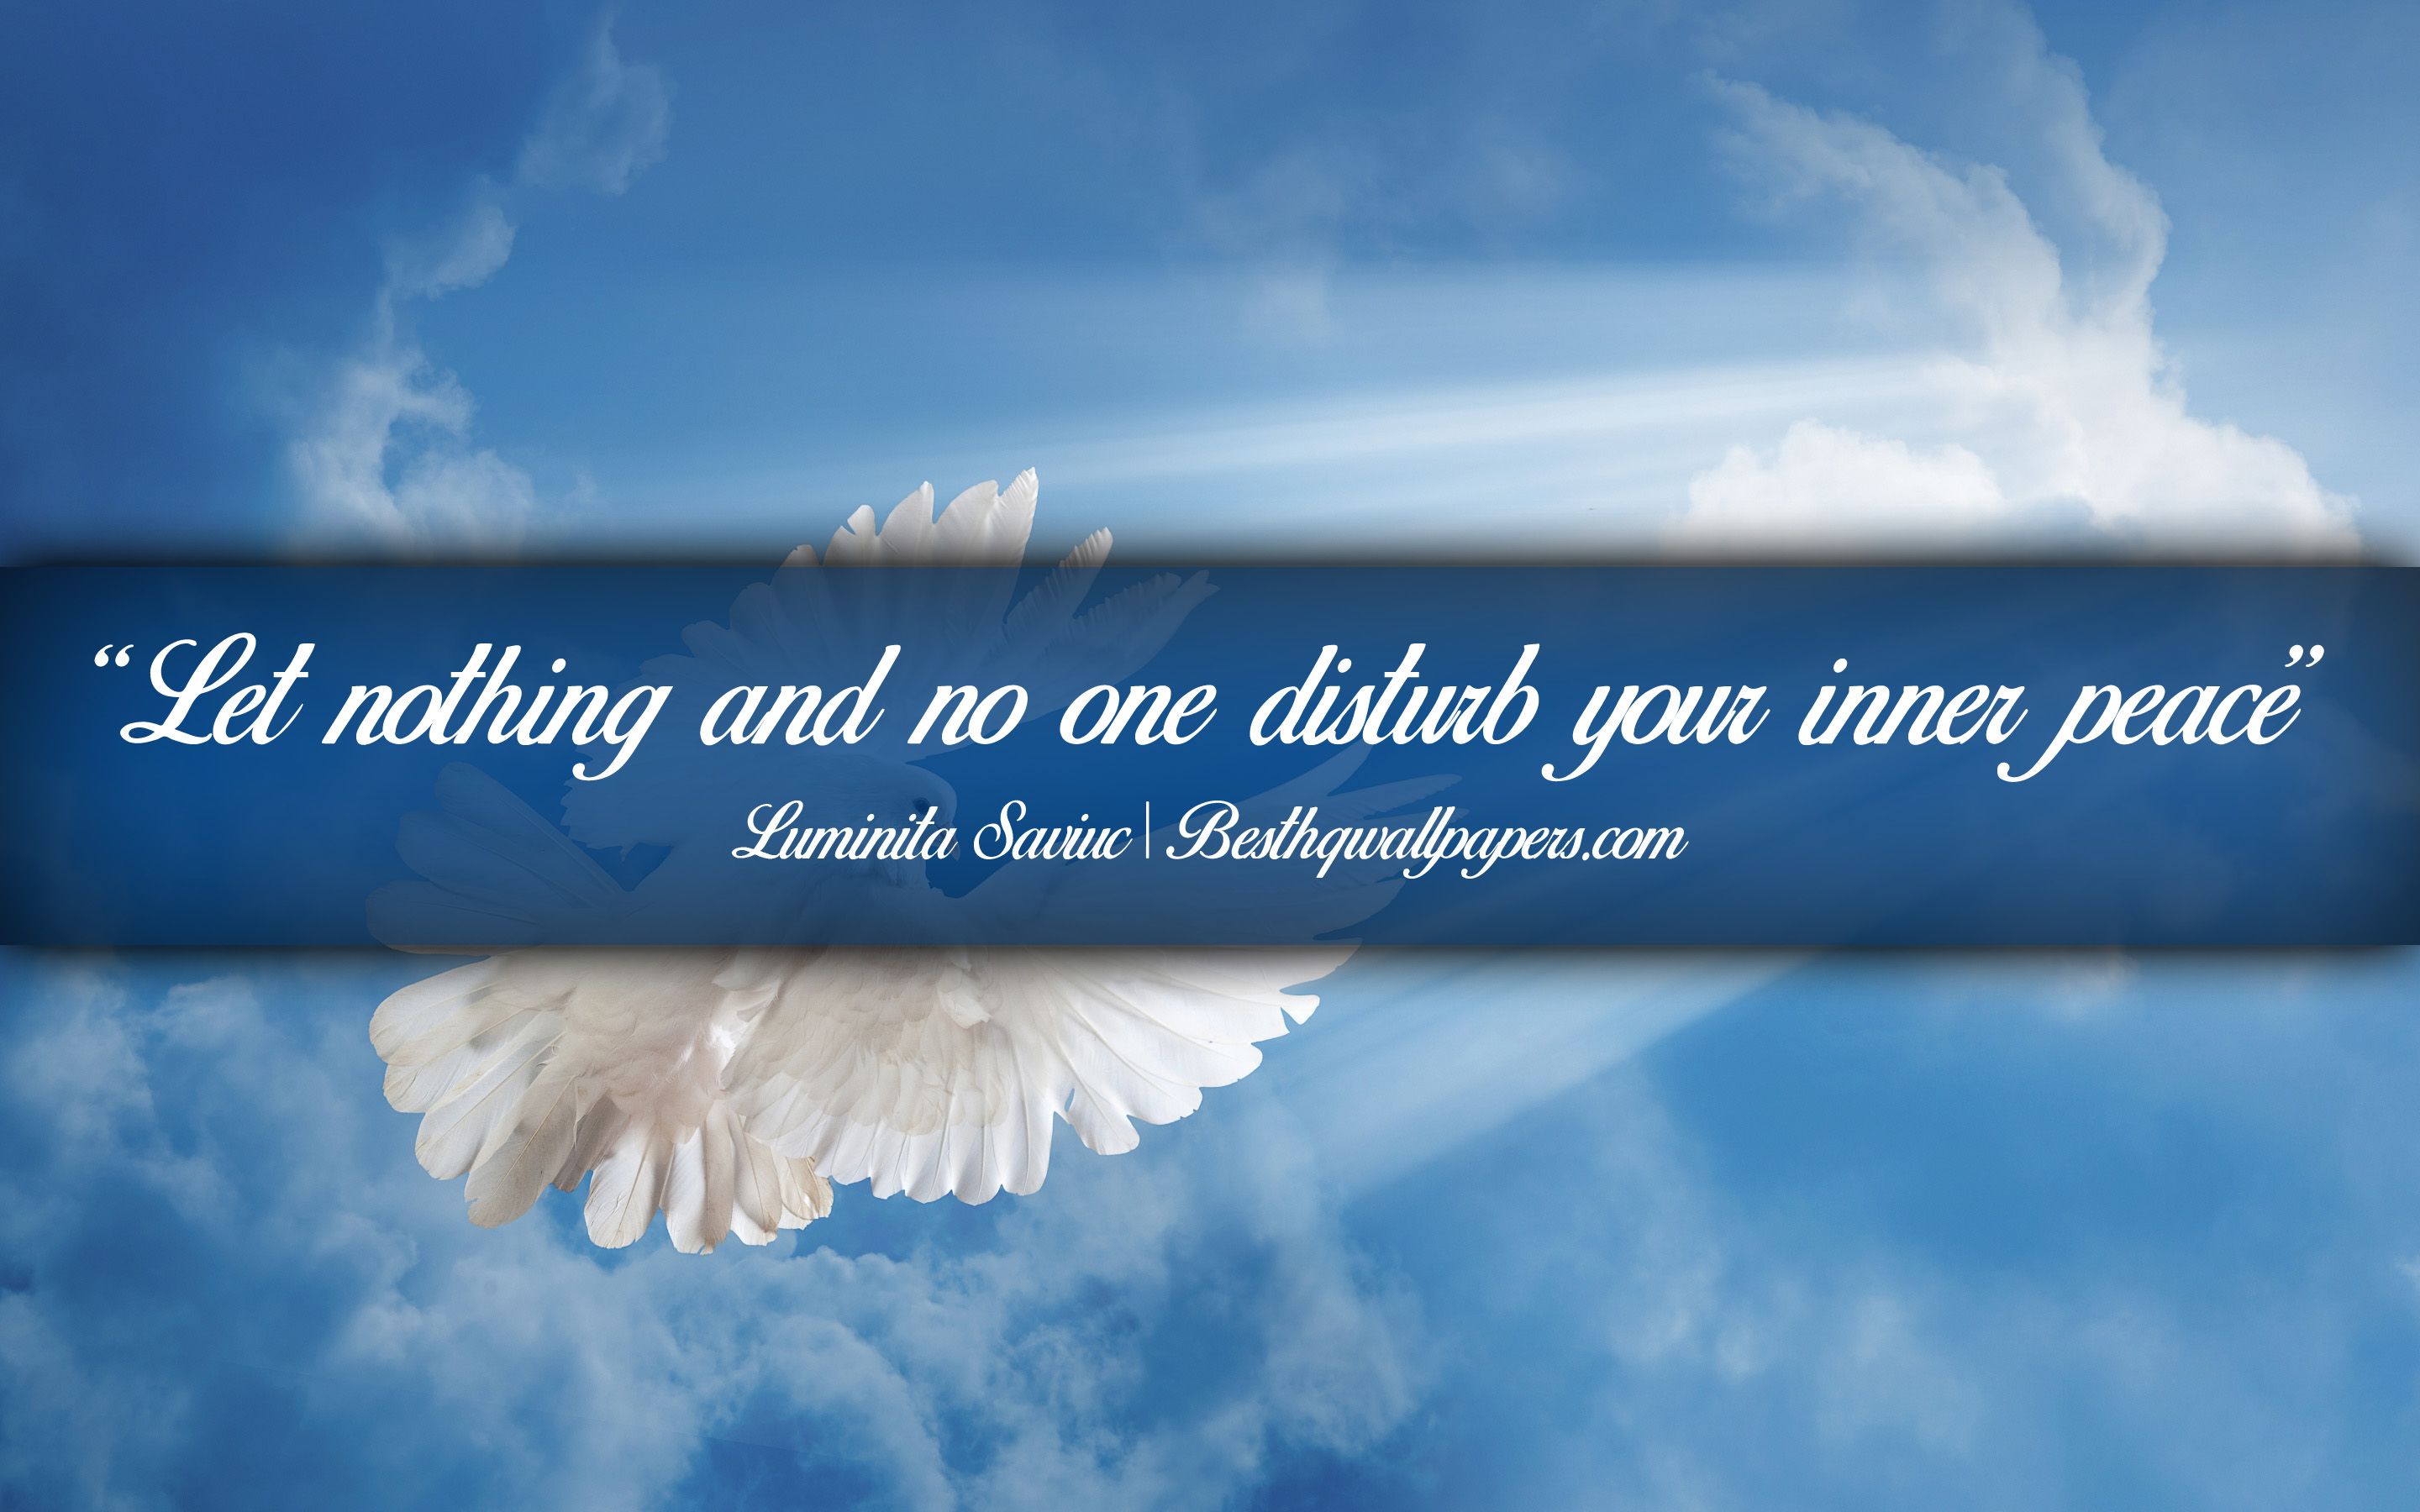 Download wallpaper Let nothing and no one disturb your inner peace, Luminita Saviuc, calligraphic text, quotes about Peace, Luminita Saviuc quotes, inspiration, background with dove for desktop with resolution 2880x1800. High Quality